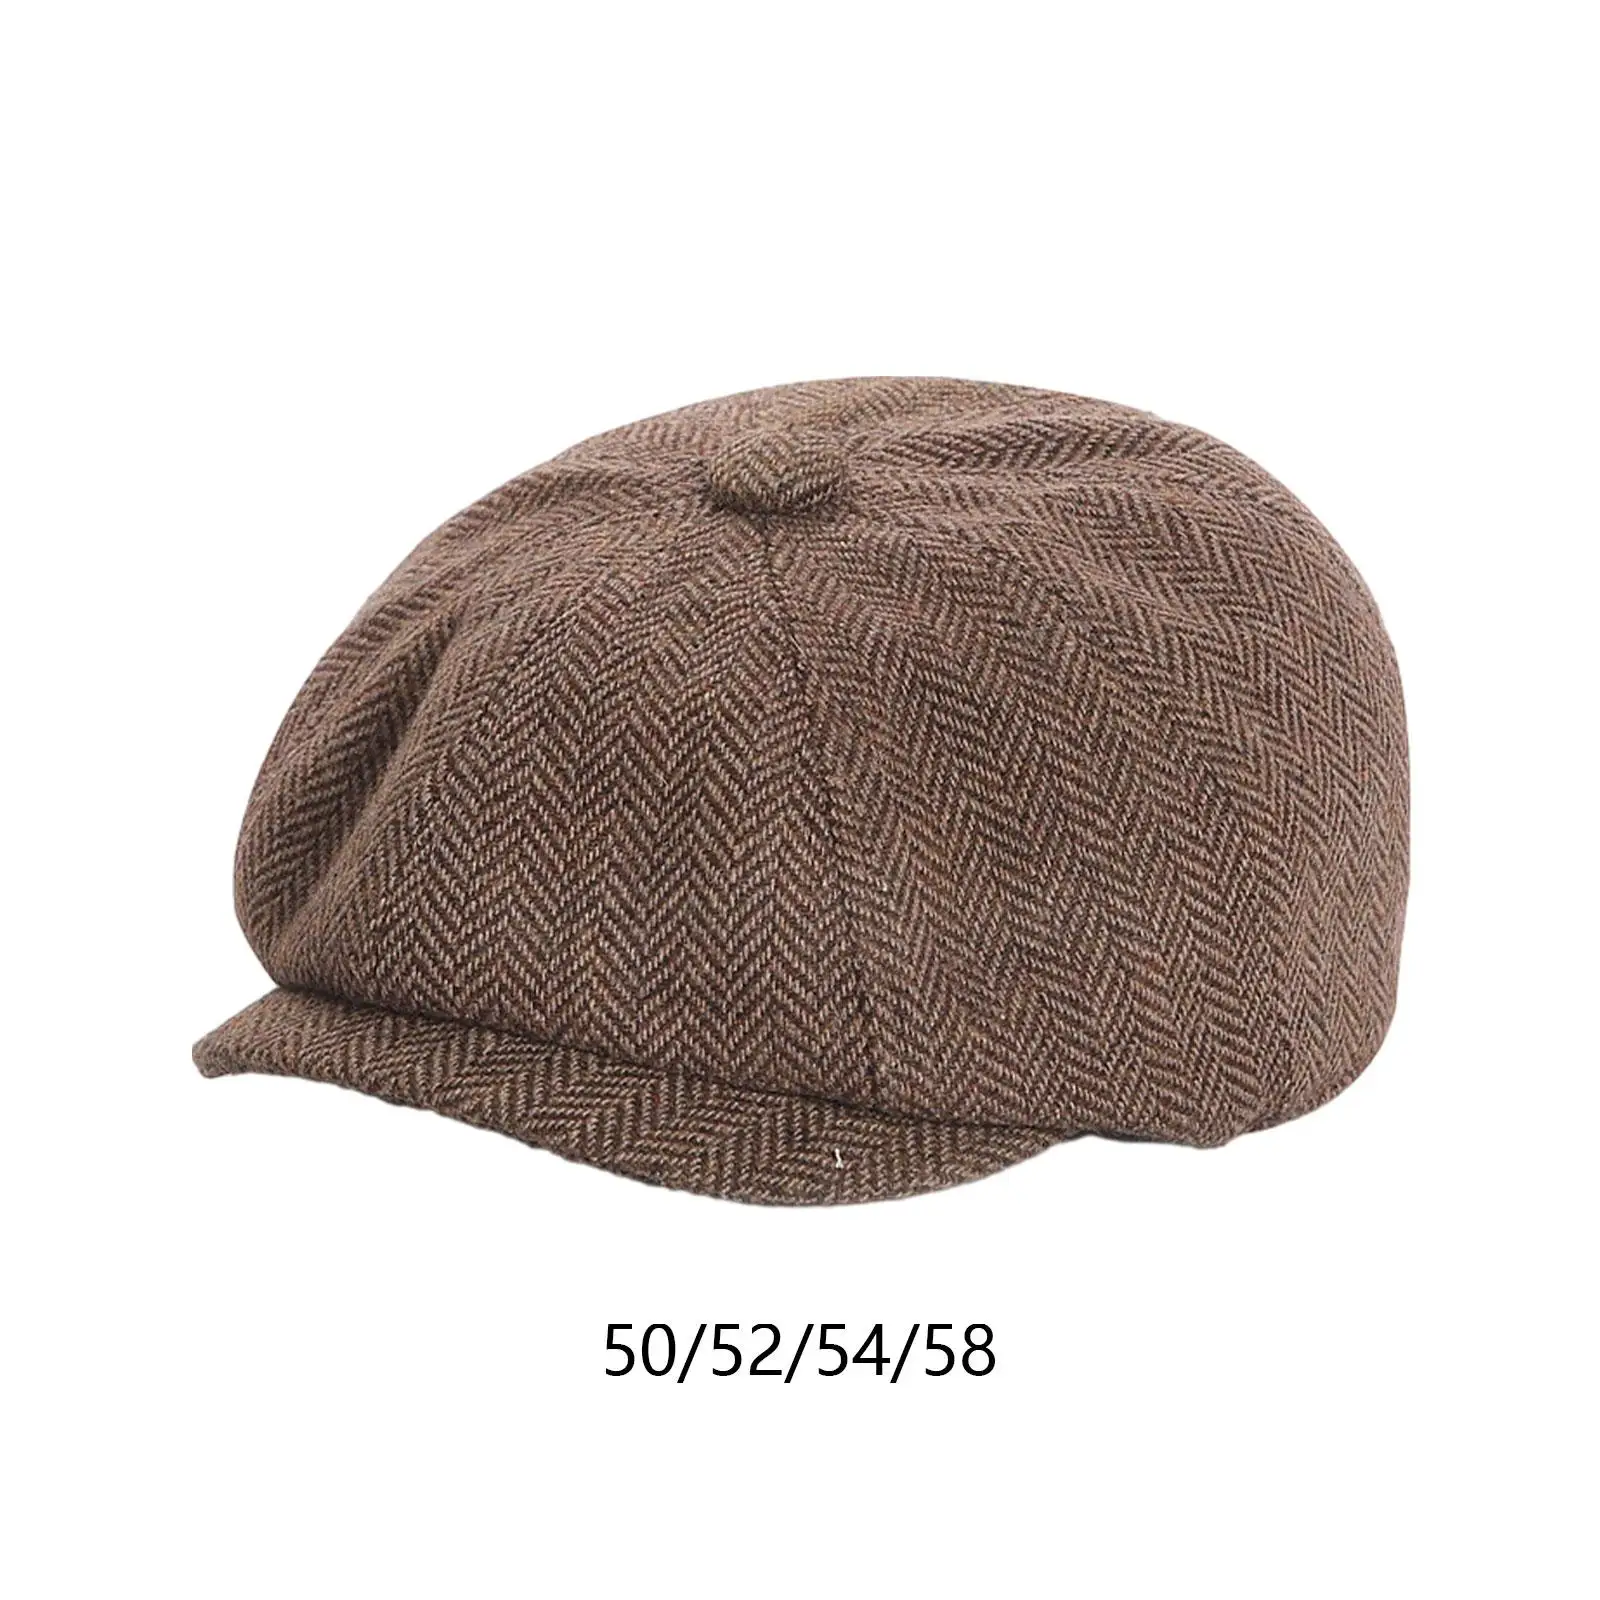 Beret Hat Octagonal Newsboy Hat Fashion Golf Hat Tweed Hat Fall Warm Gift Flat Hat for Outdoor Travel Hiking Driving Camping